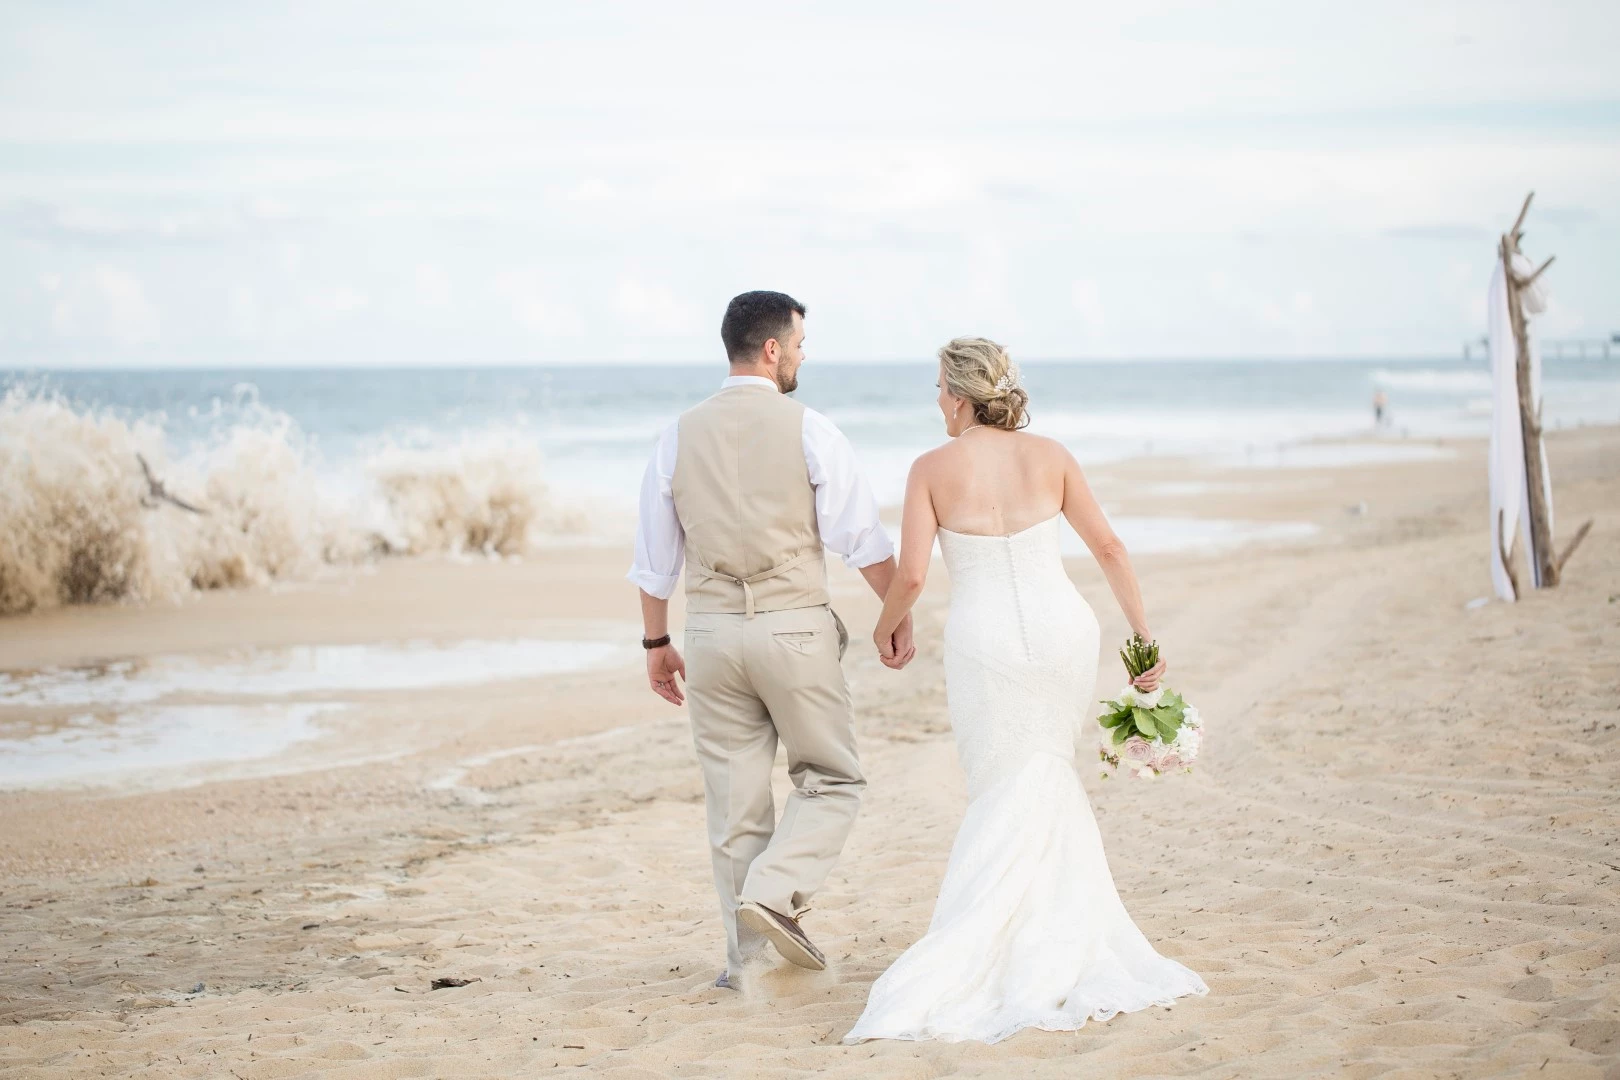 zNags Head Golf Links - Bride and Groom